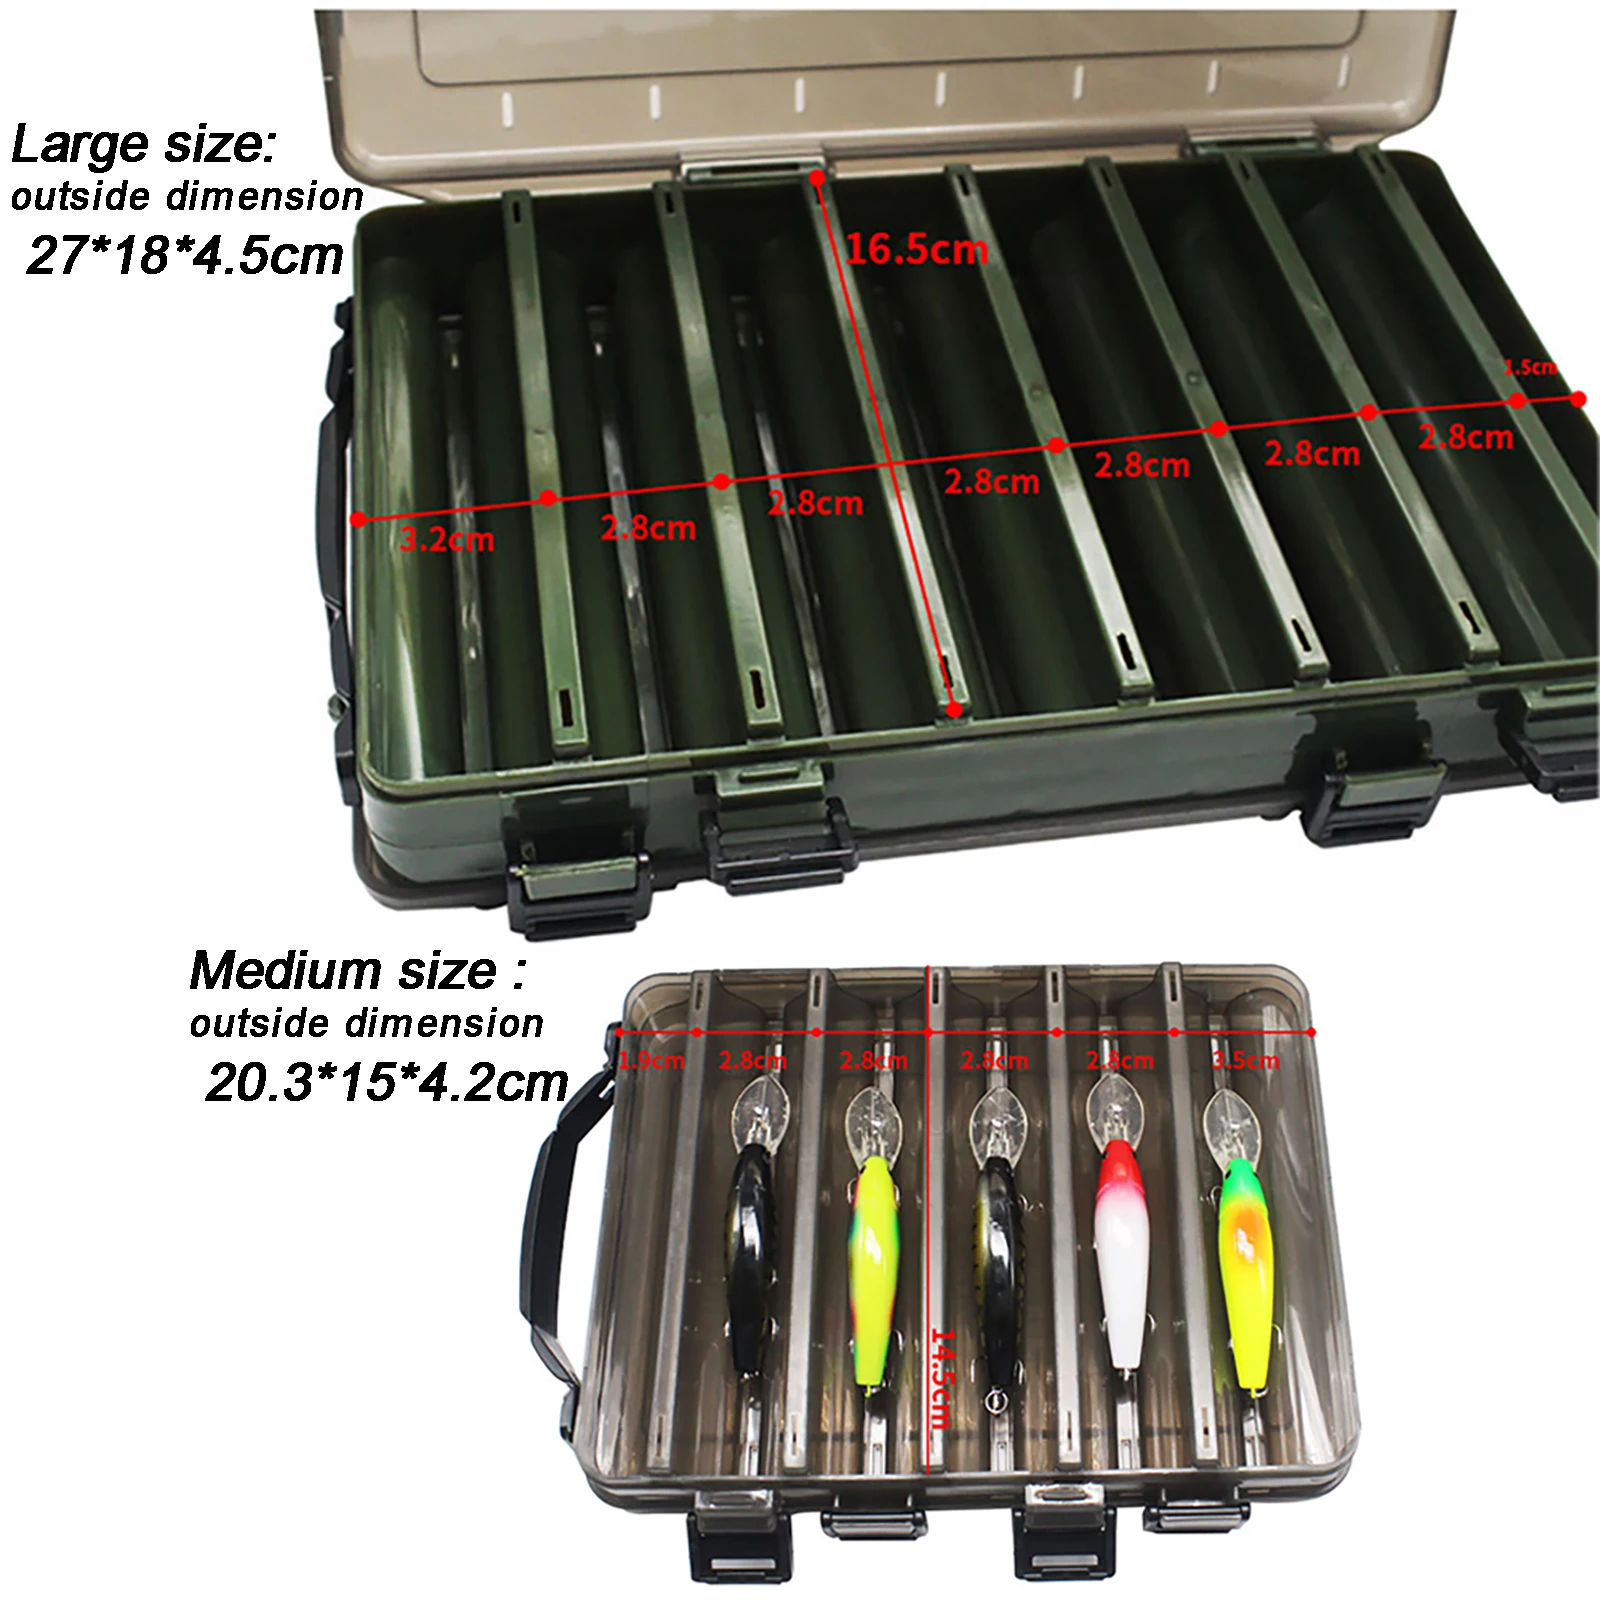 https://ae01.alicdn.com/kf/S26826de0ae8447888f42c15a54e8d3b3U/Extra-Large-Fishing-Tackle-Boxes-Double-Layer-Bait-Container-Portable-Lure-Storage-Multi-Compartments-Gear-Tool.jpg